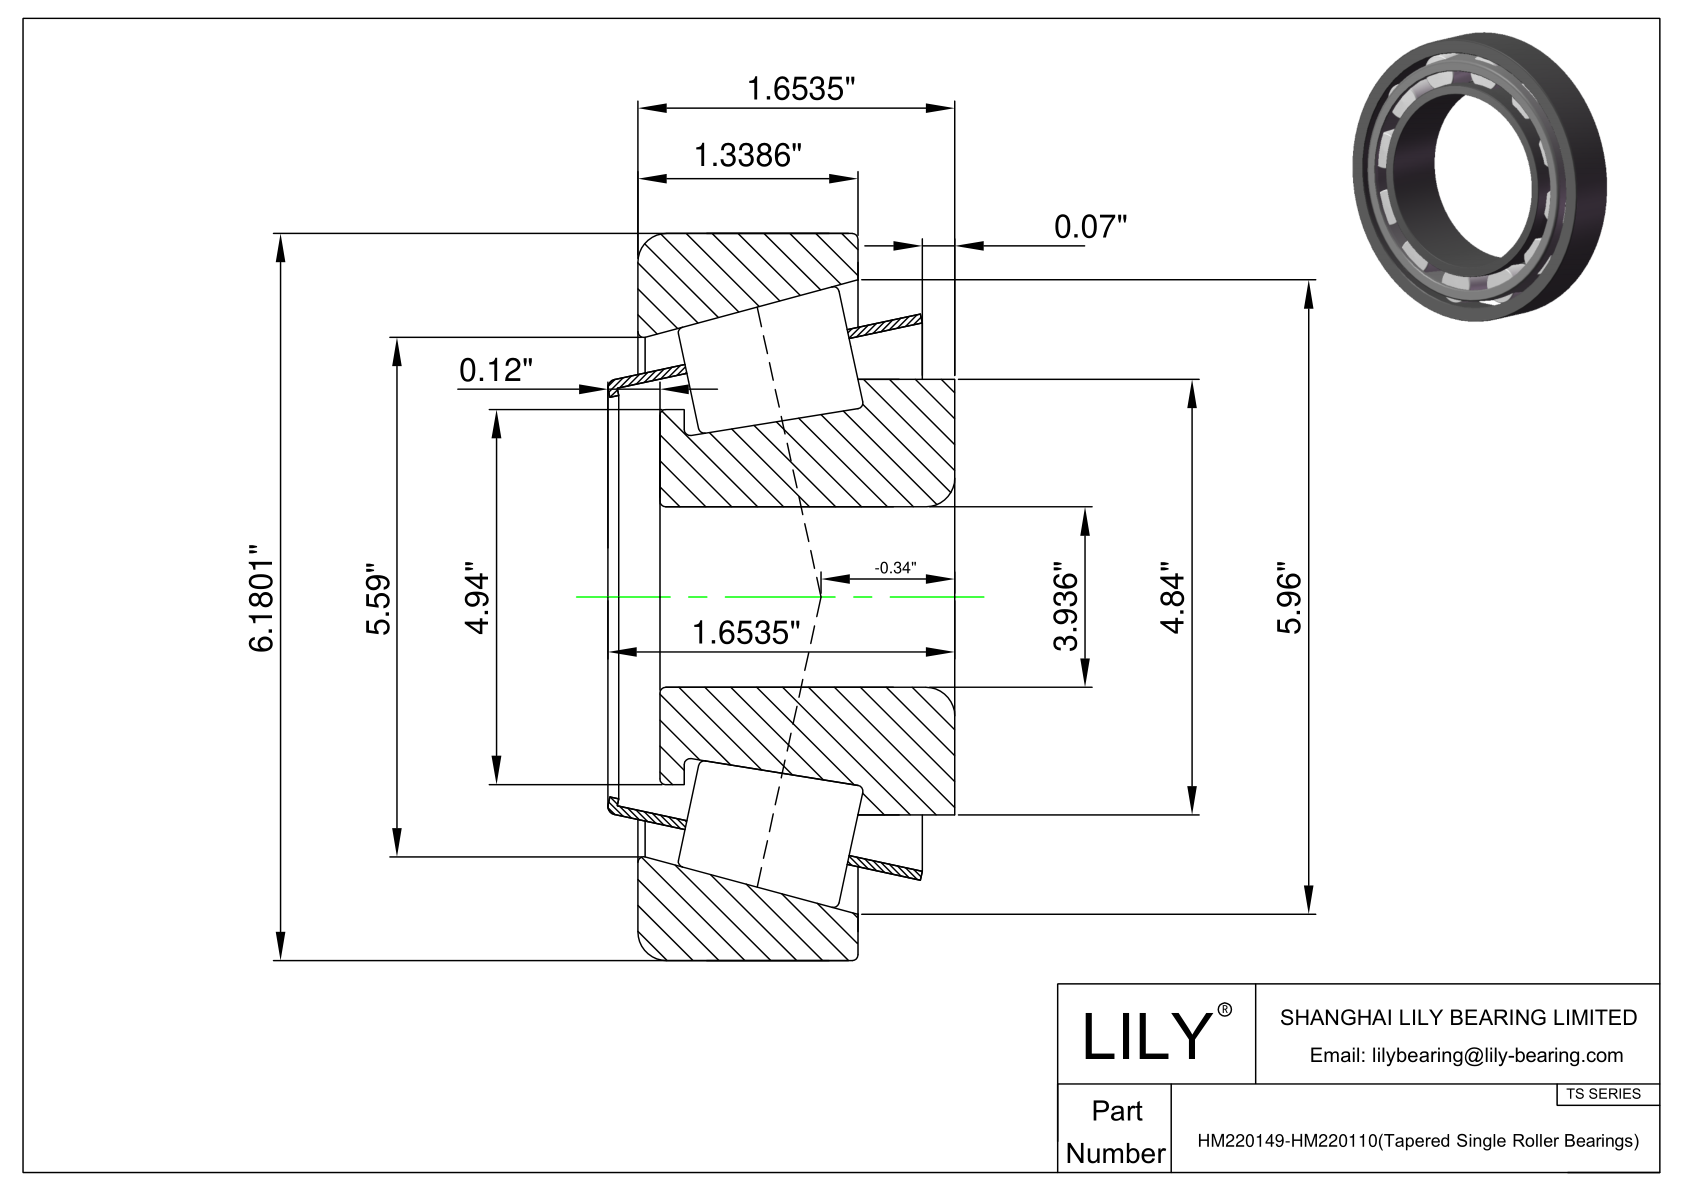 HM220149-HM220110 TS (Tapered Single Roller Bearings) (Imperial) cad drawing